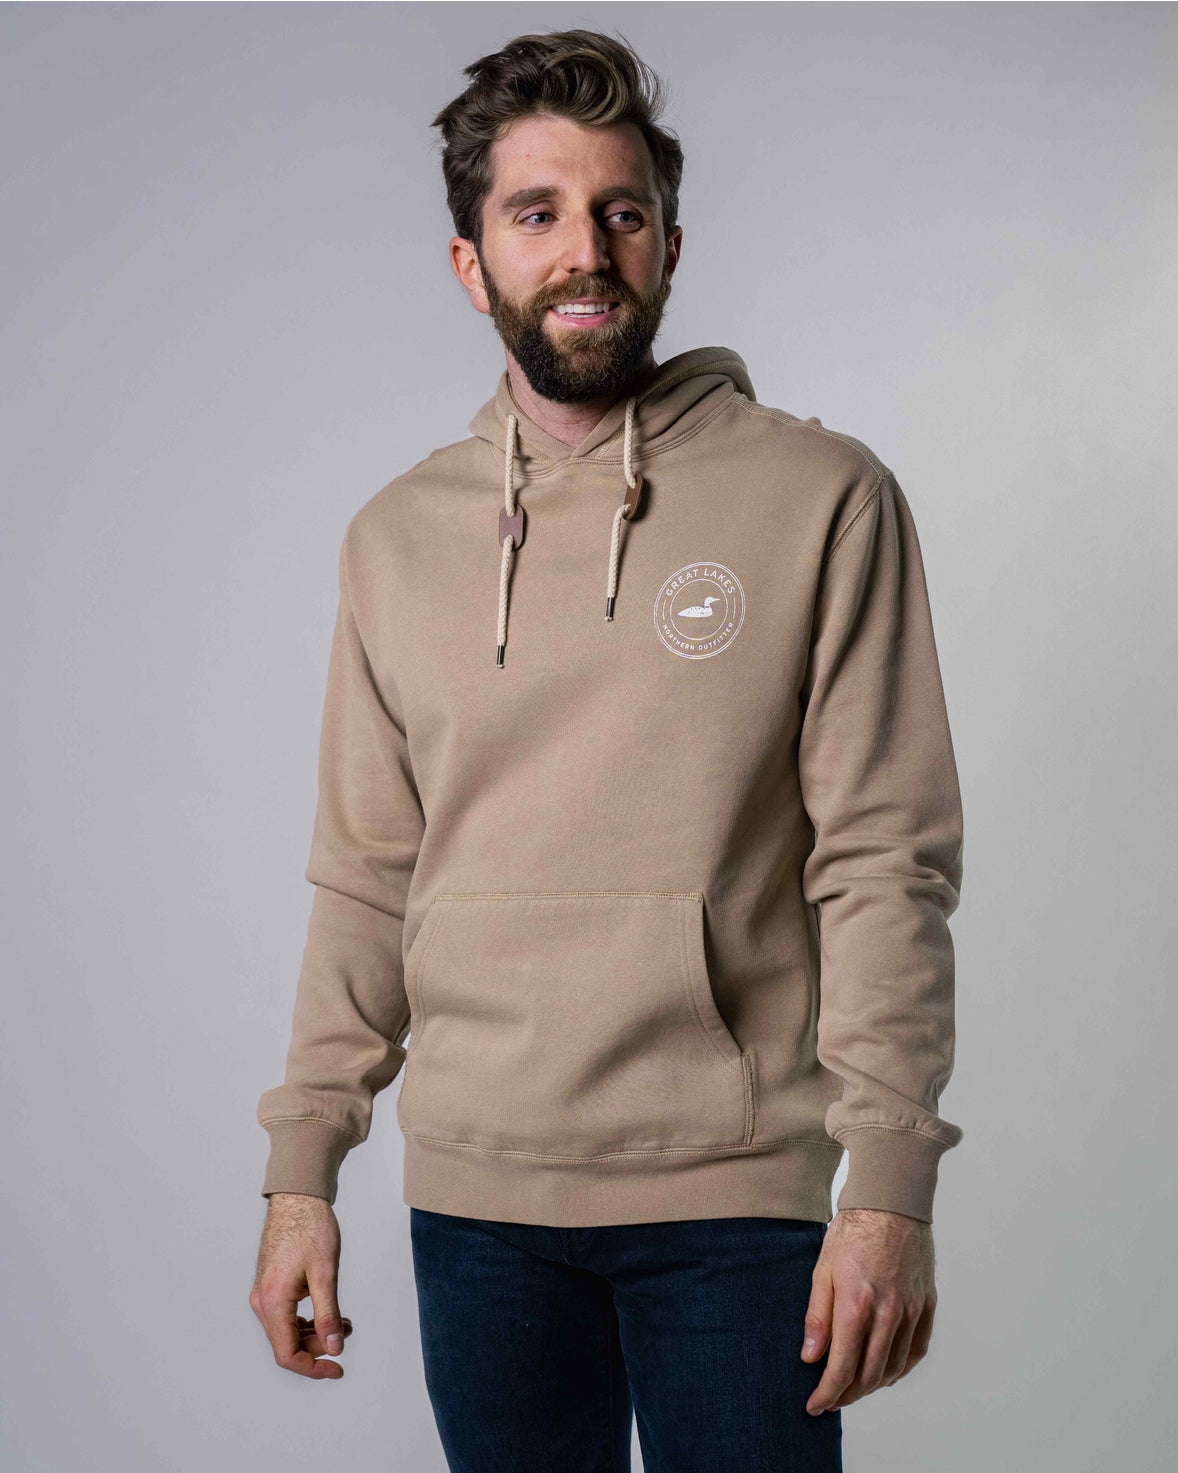 Walleye Hoodie - Storm and Sky Shoppe - Great Lakes